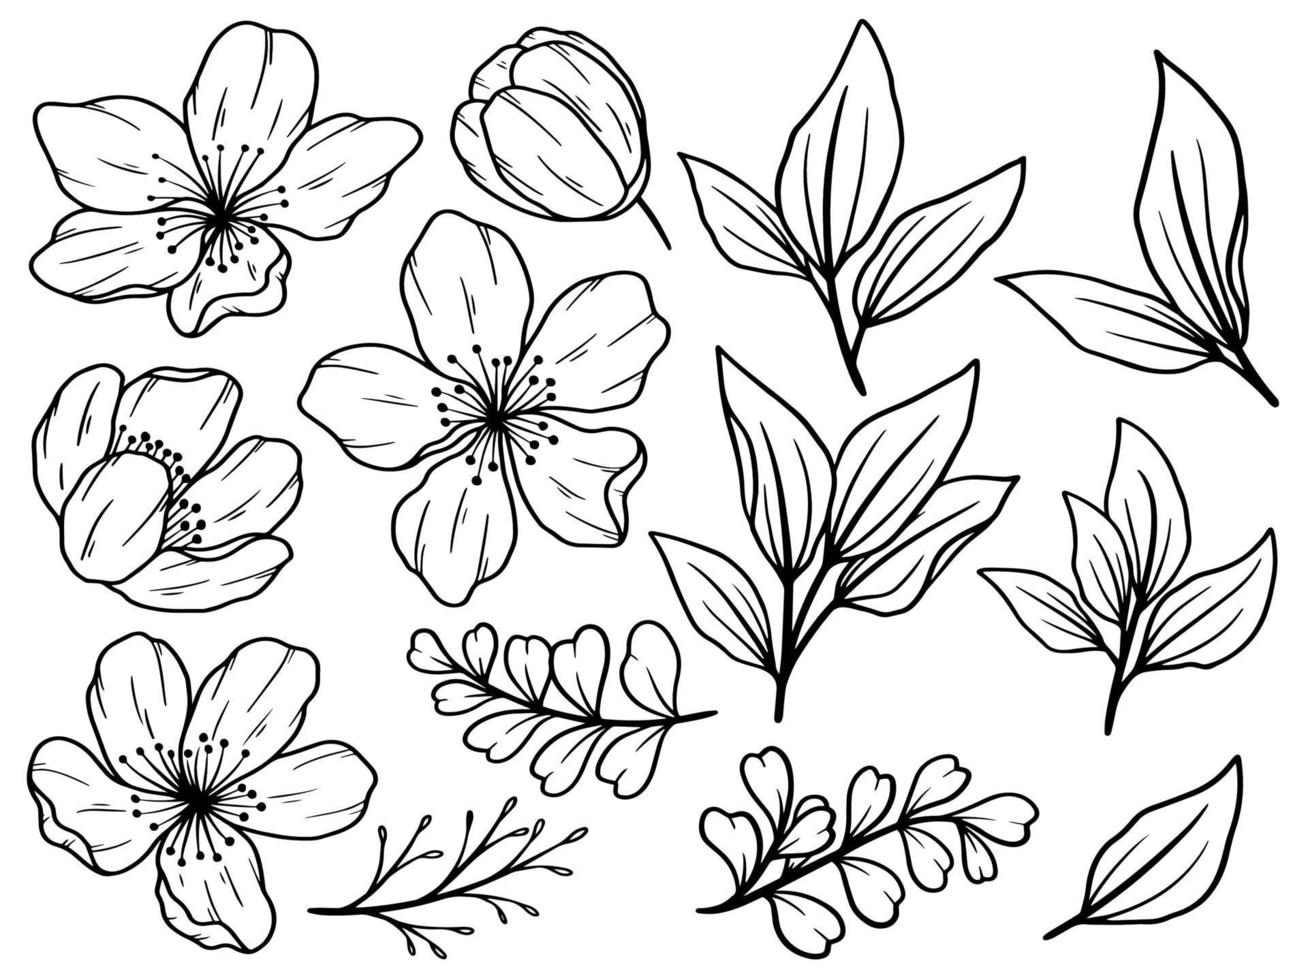 Flower line art hand drawn collection vector